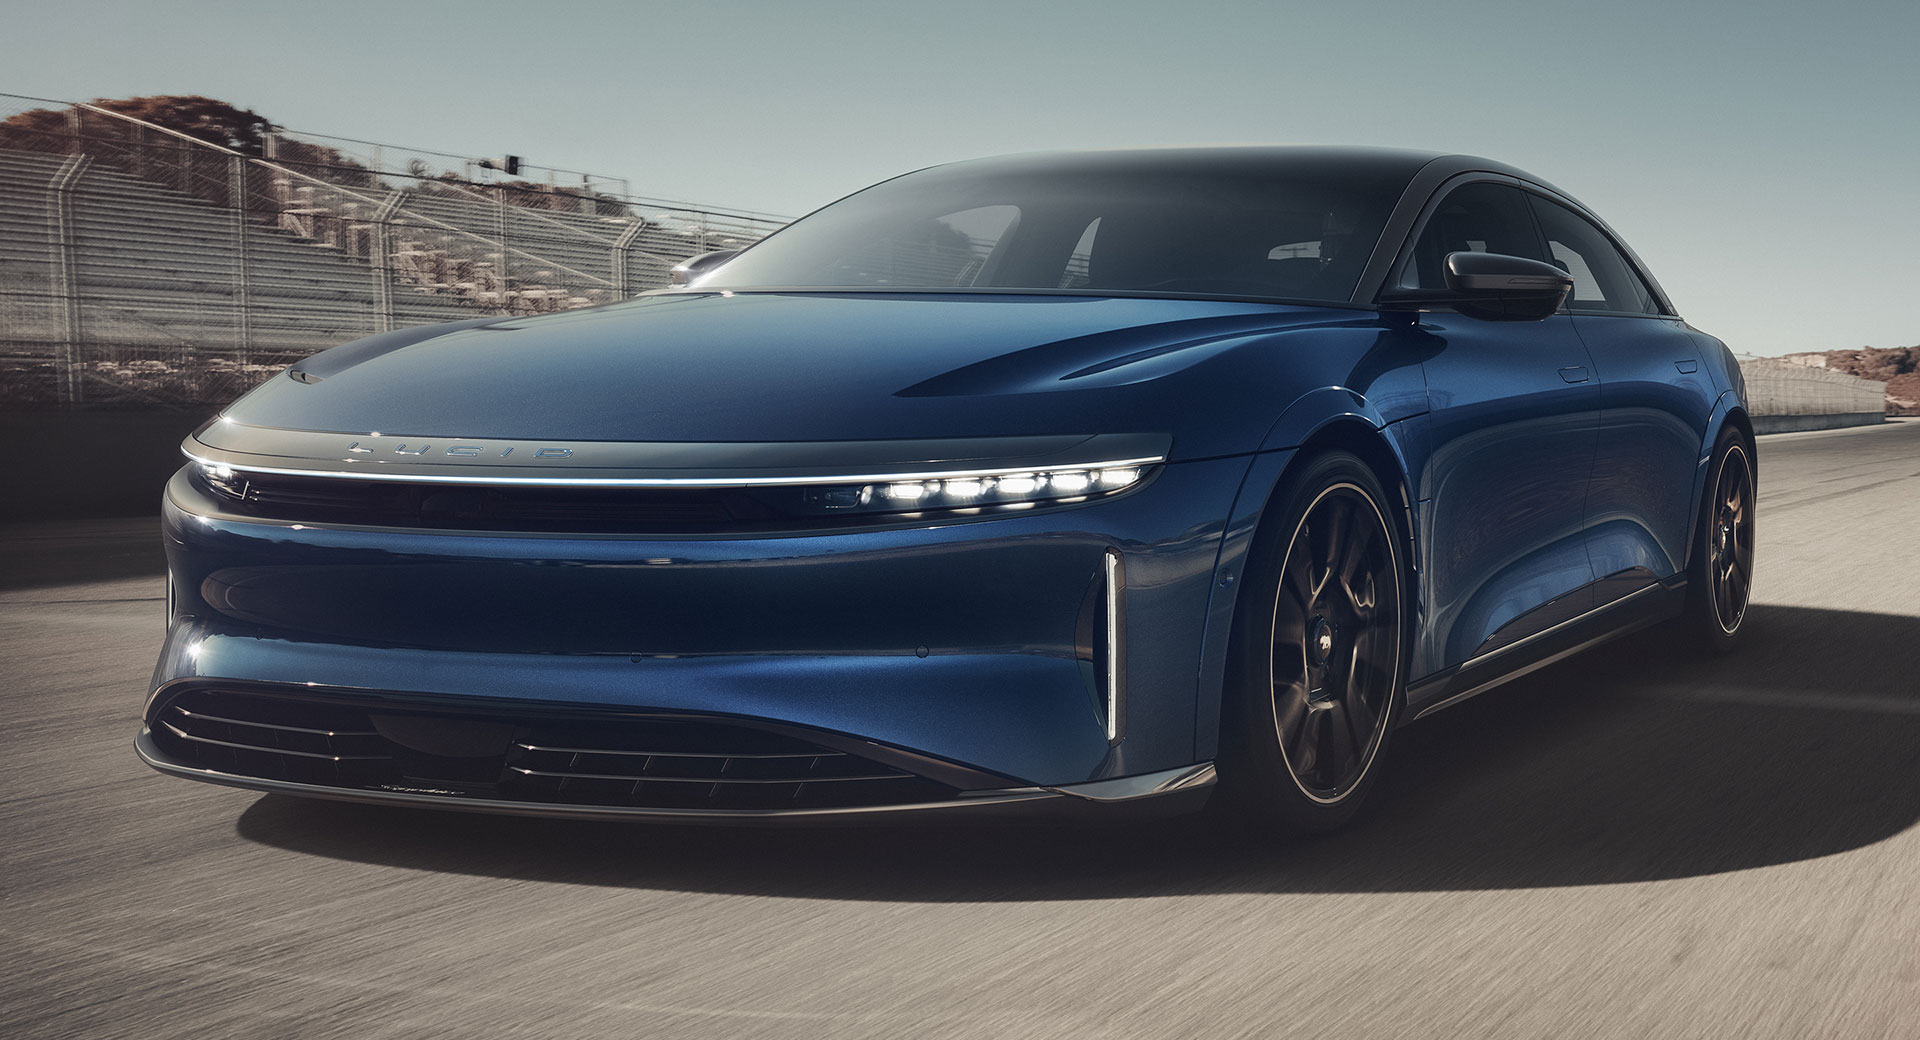 Portico Grønne bønner mønster Lucid Air Sapphire Runs To 60 MPH In 1.89 Seconds, Can Hit 205 MPH |  Carscoops